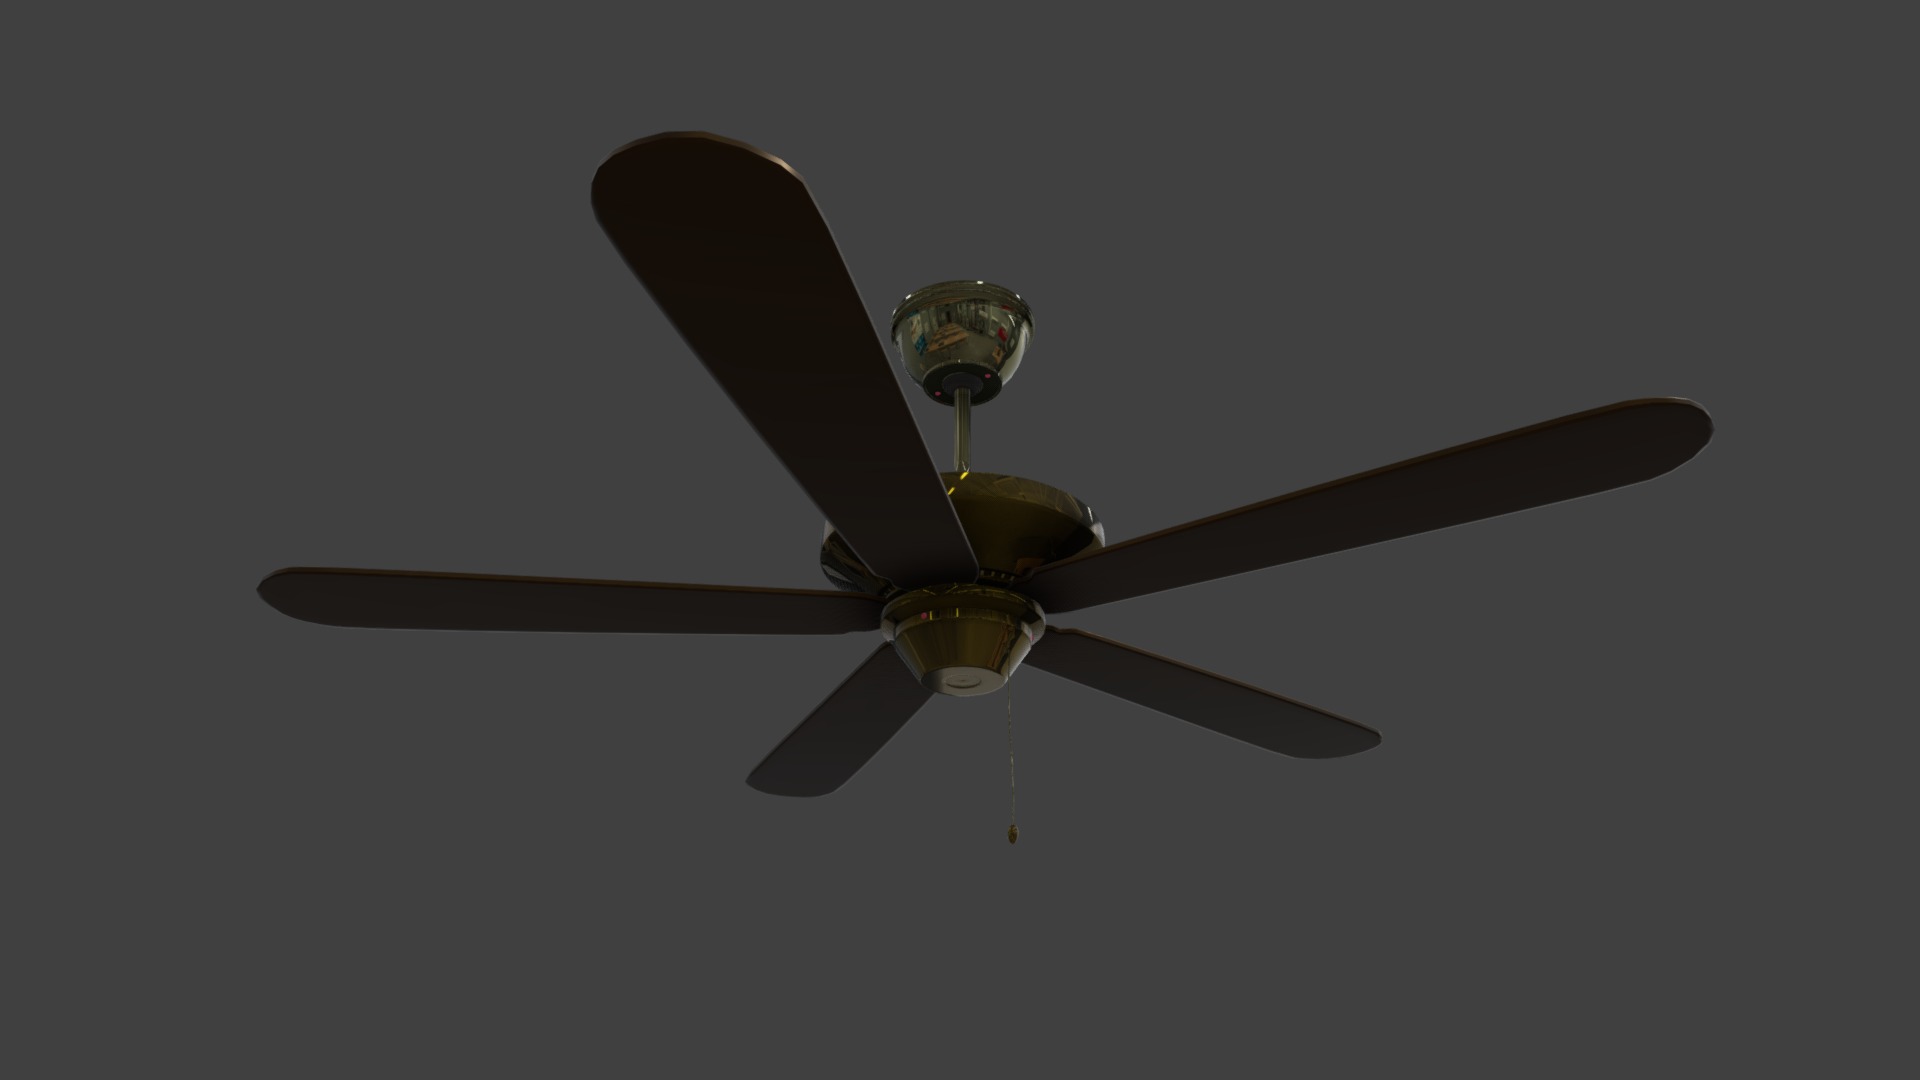 3D model HGPtrong AB - This is a 3D model of the HGPtrong AB. The 3D model is about a ceiling fan with a light.